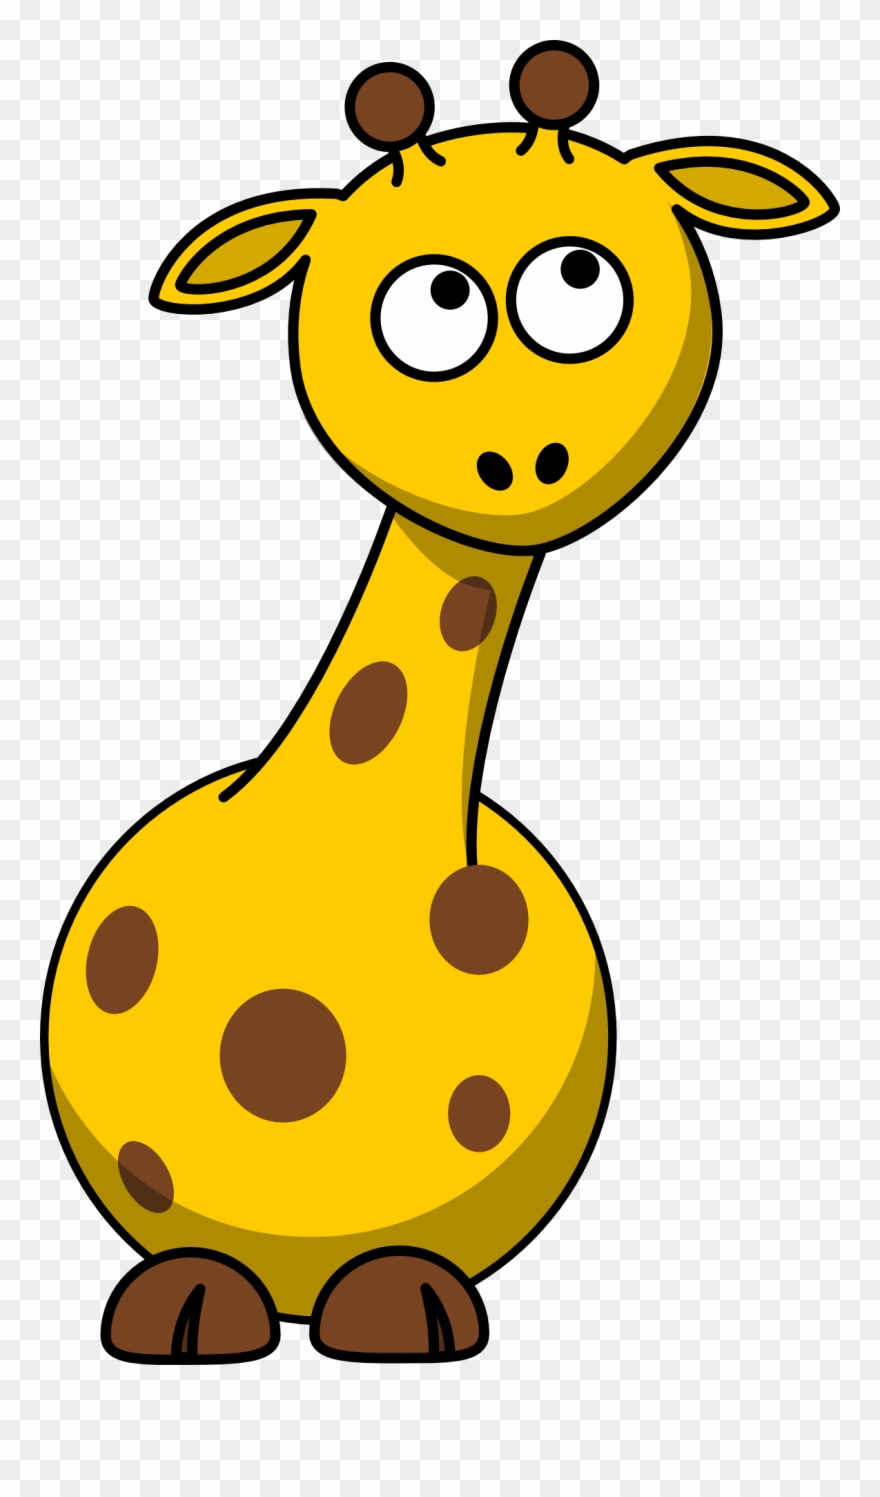 Download Giraffe clipart cartoon pictures on Cliparts Pub 2020! 🔝